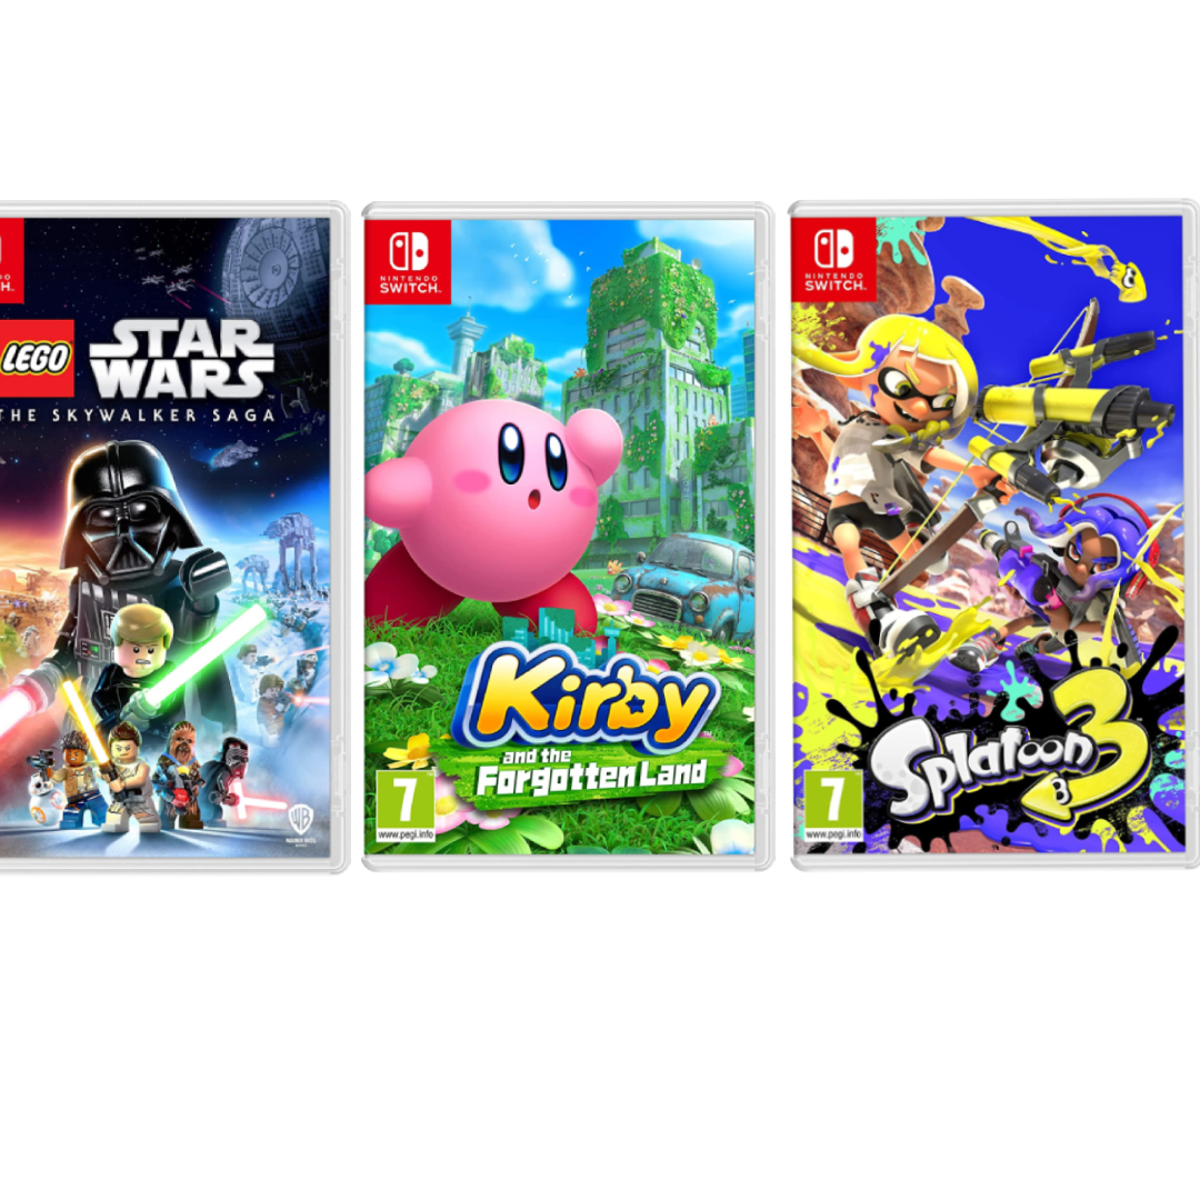 Save up to 26 per cent on select Nintendo Switch games at